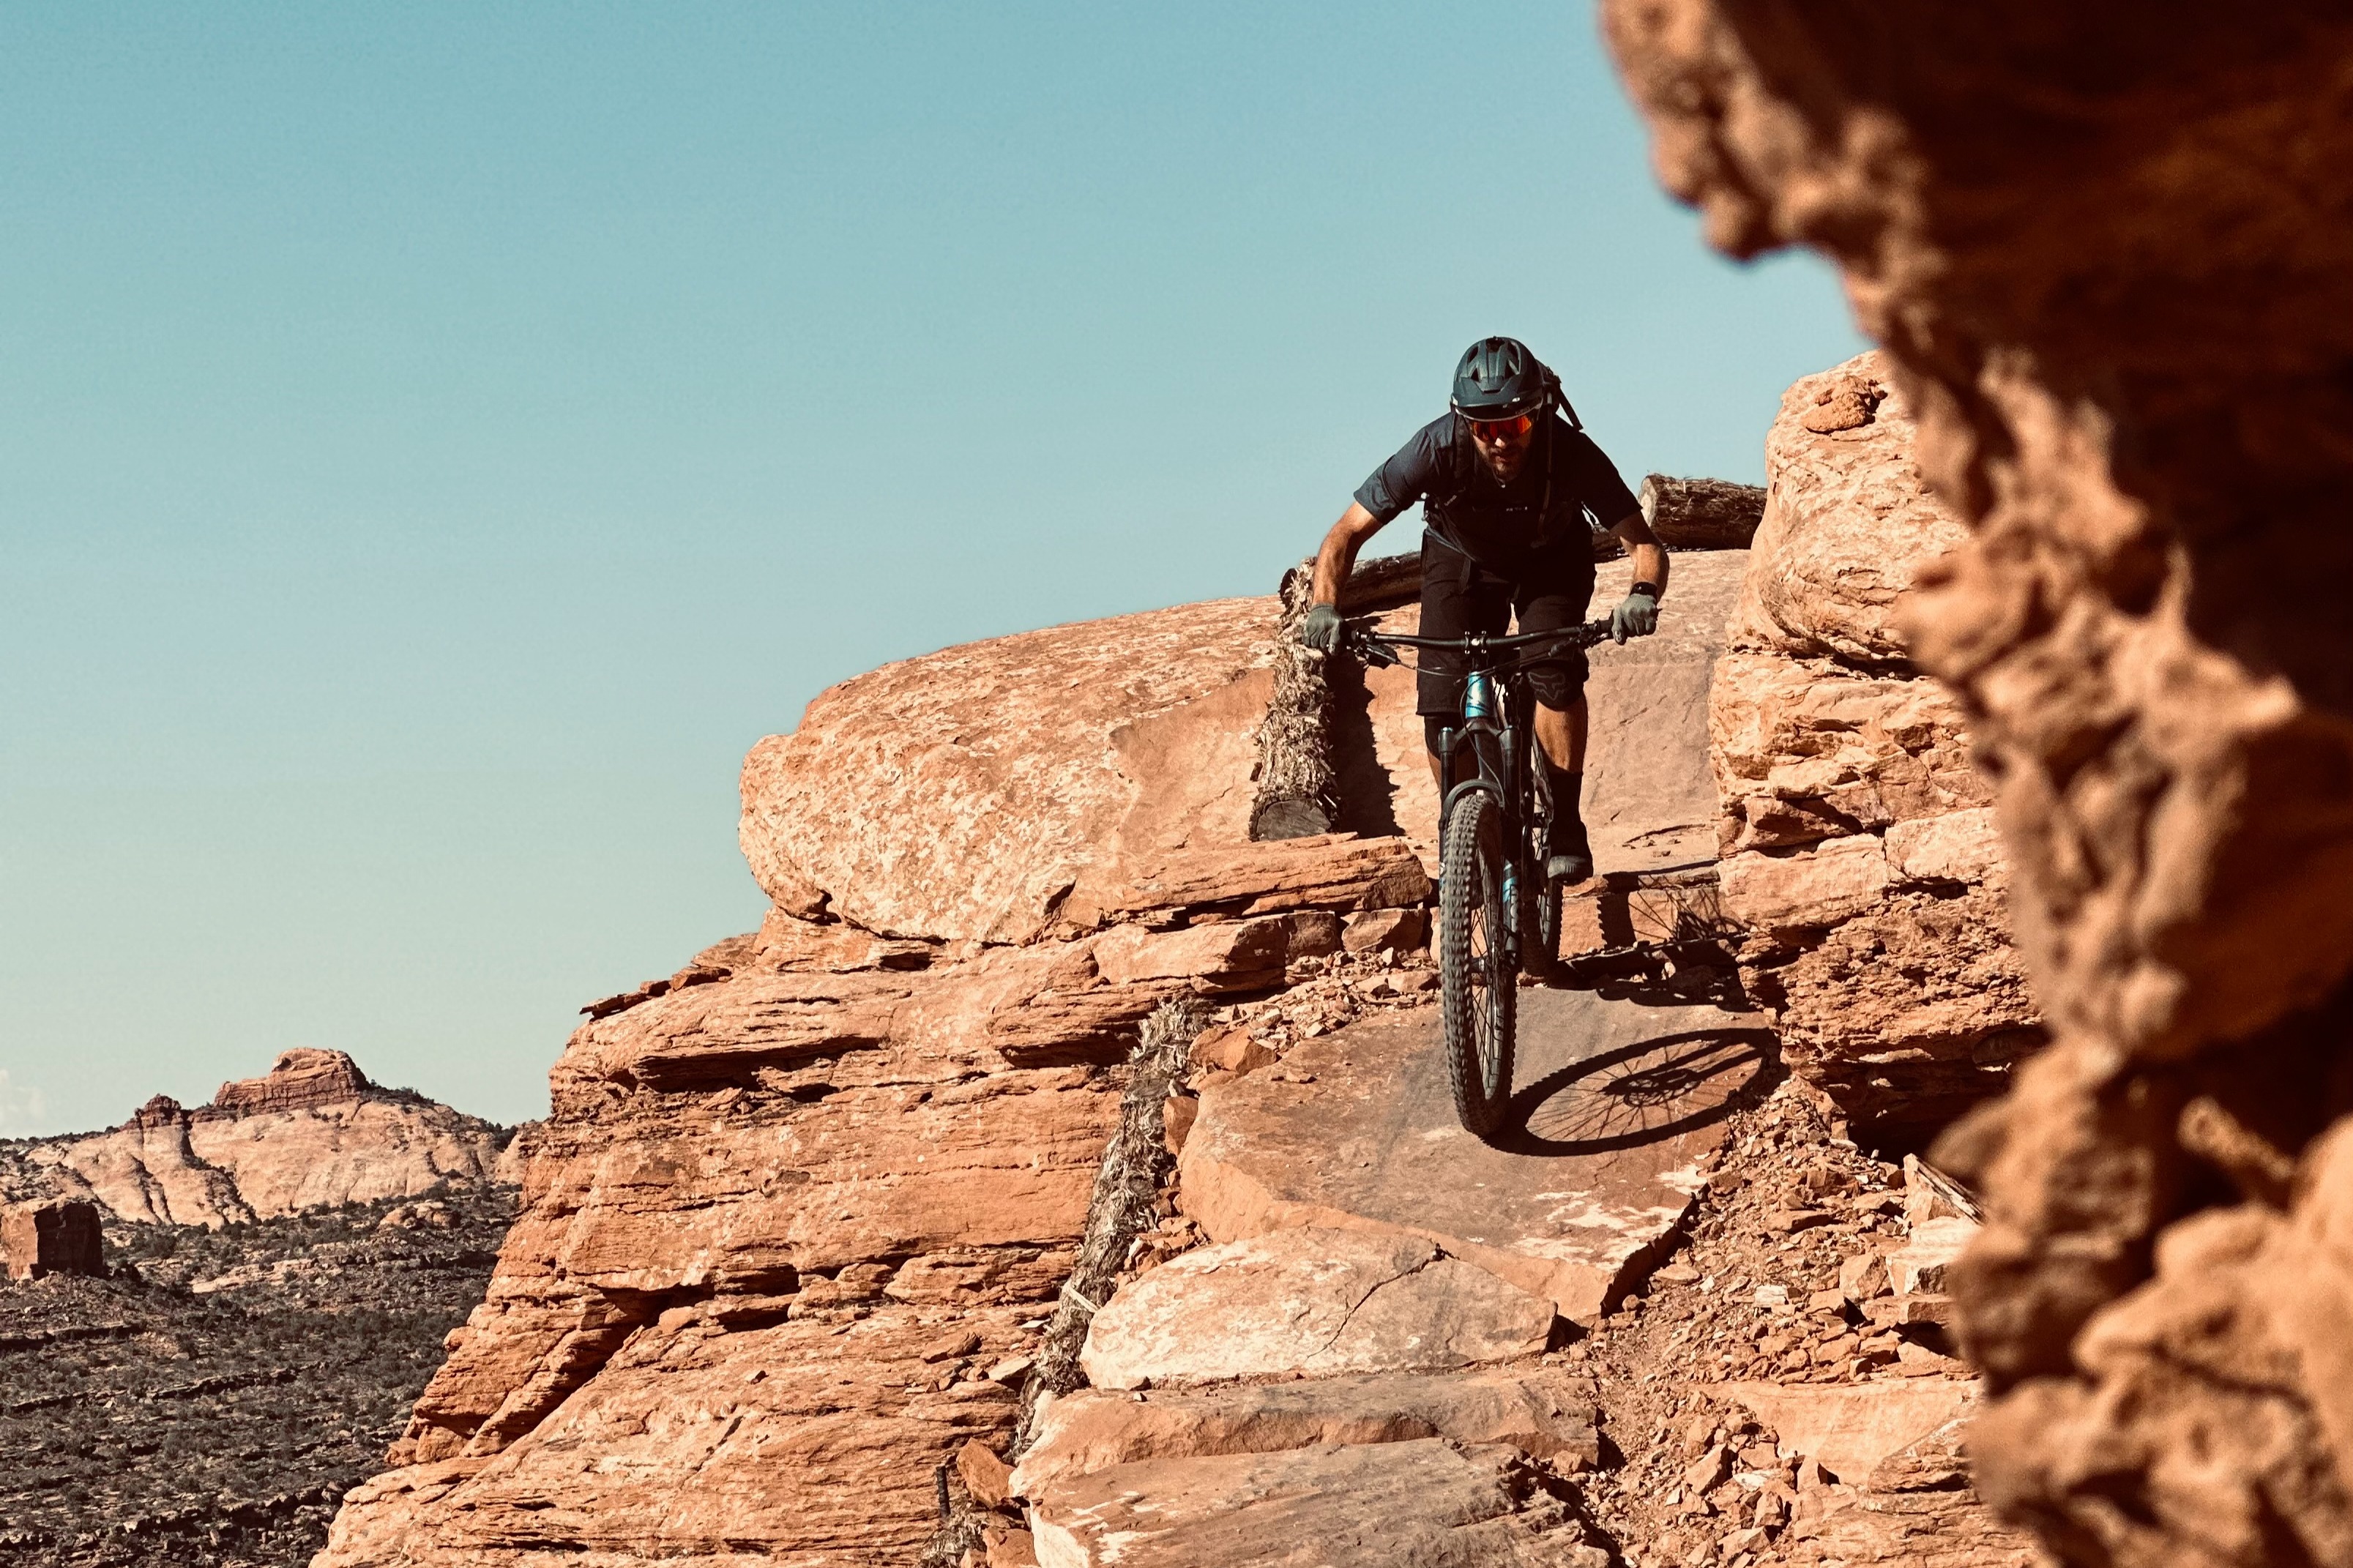 The Most Technical Mountain Bike Trails in the World